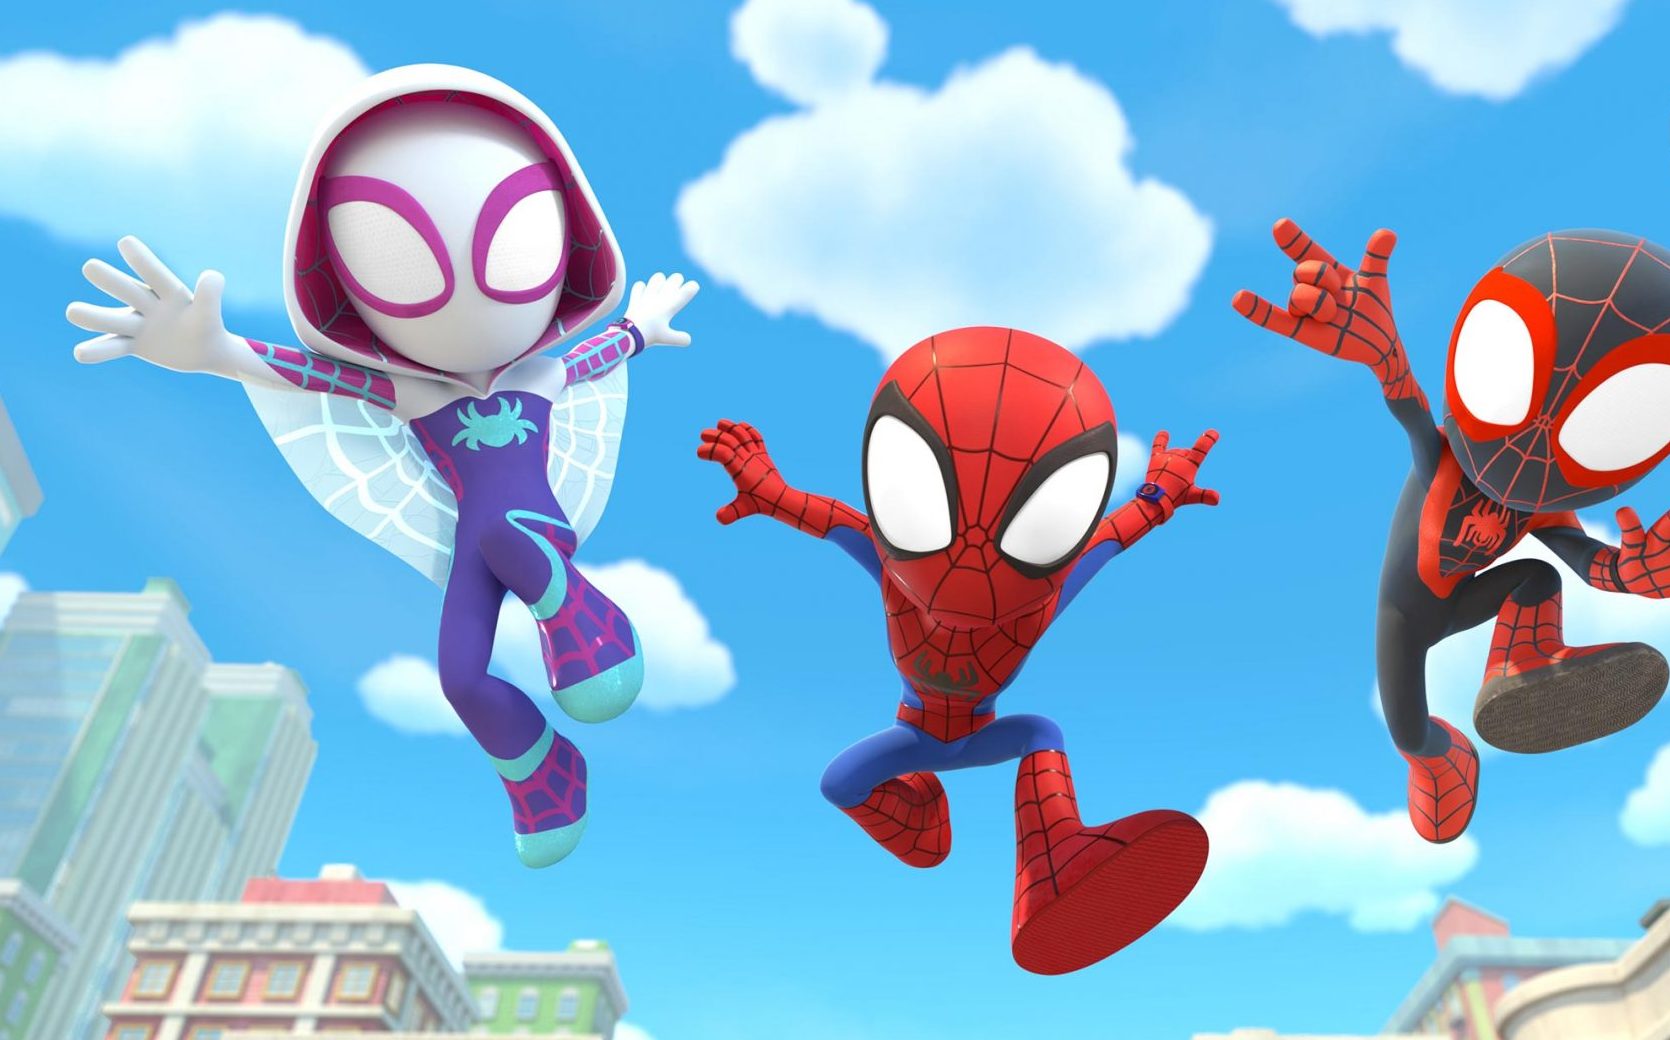 Spidey and his amazing friends, Spider-Man